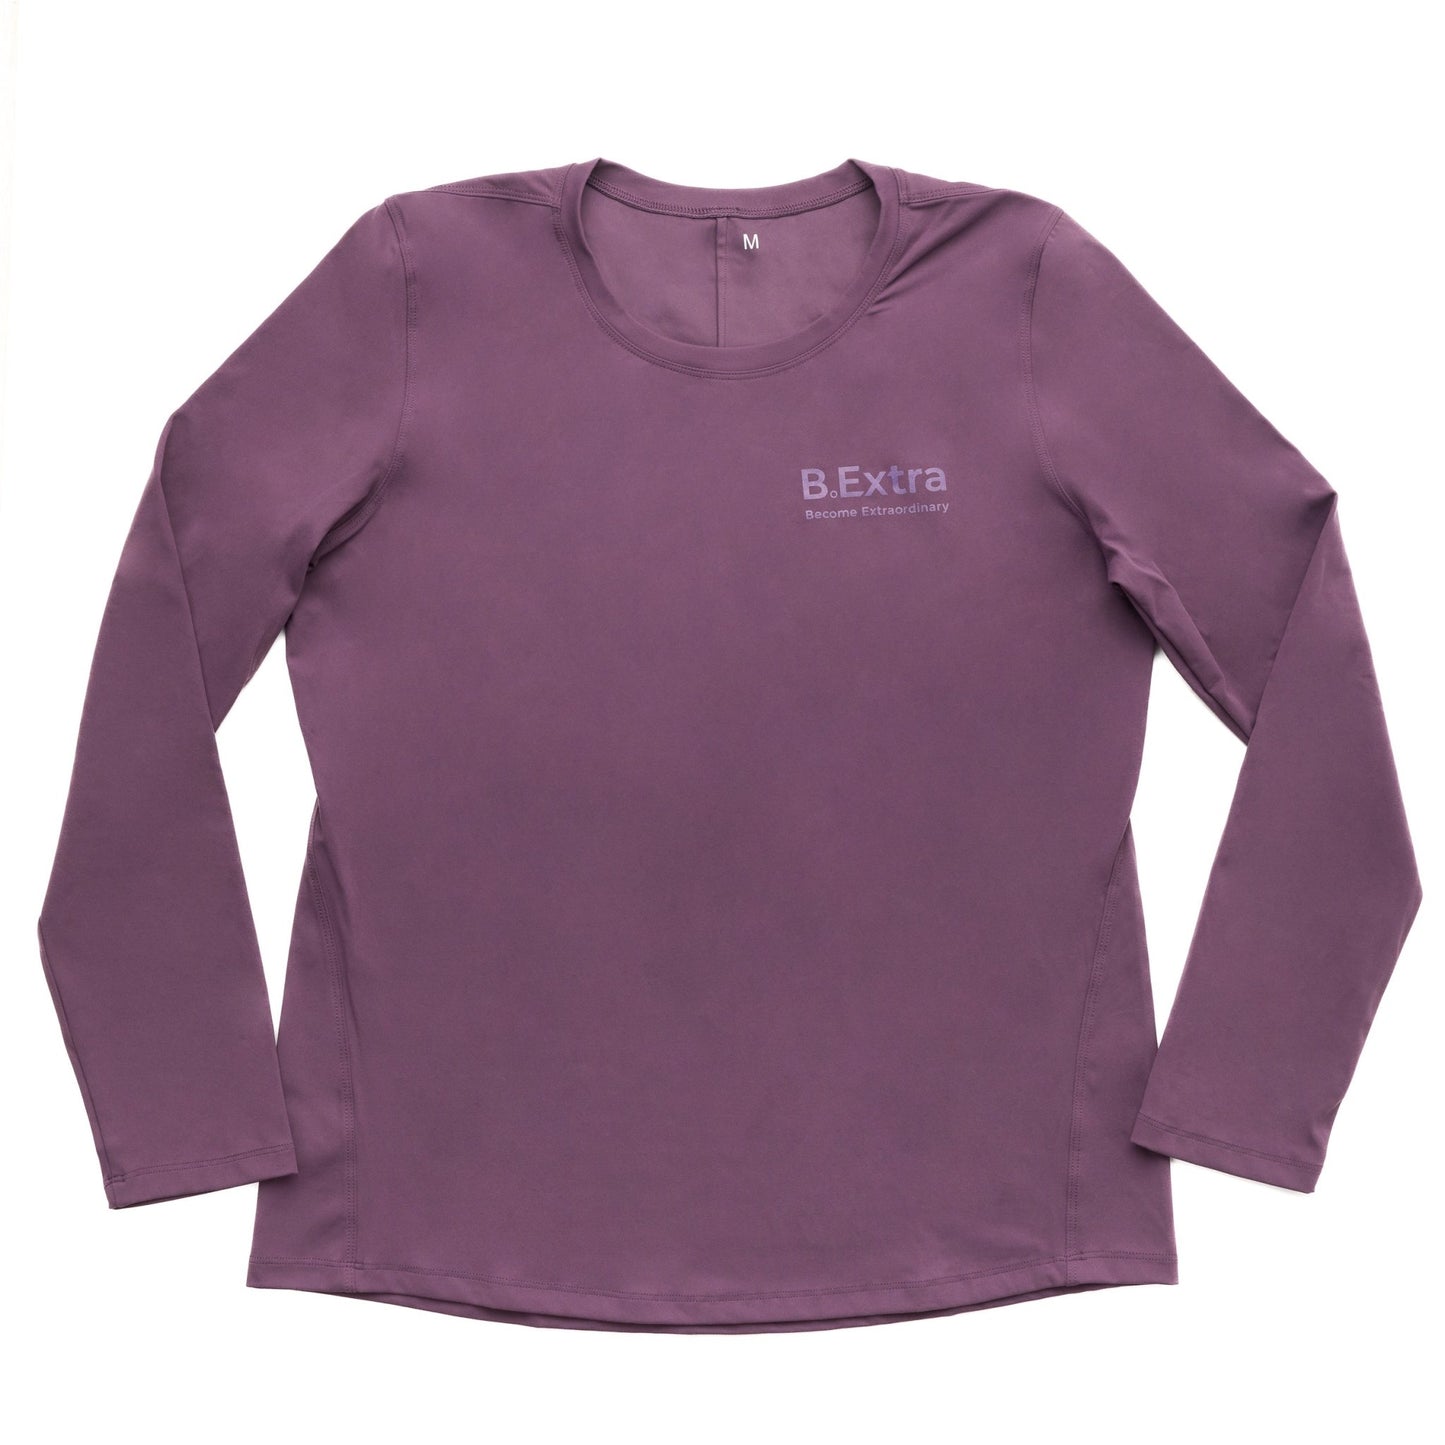 Stretch it out long sleeve - Dark Lavender